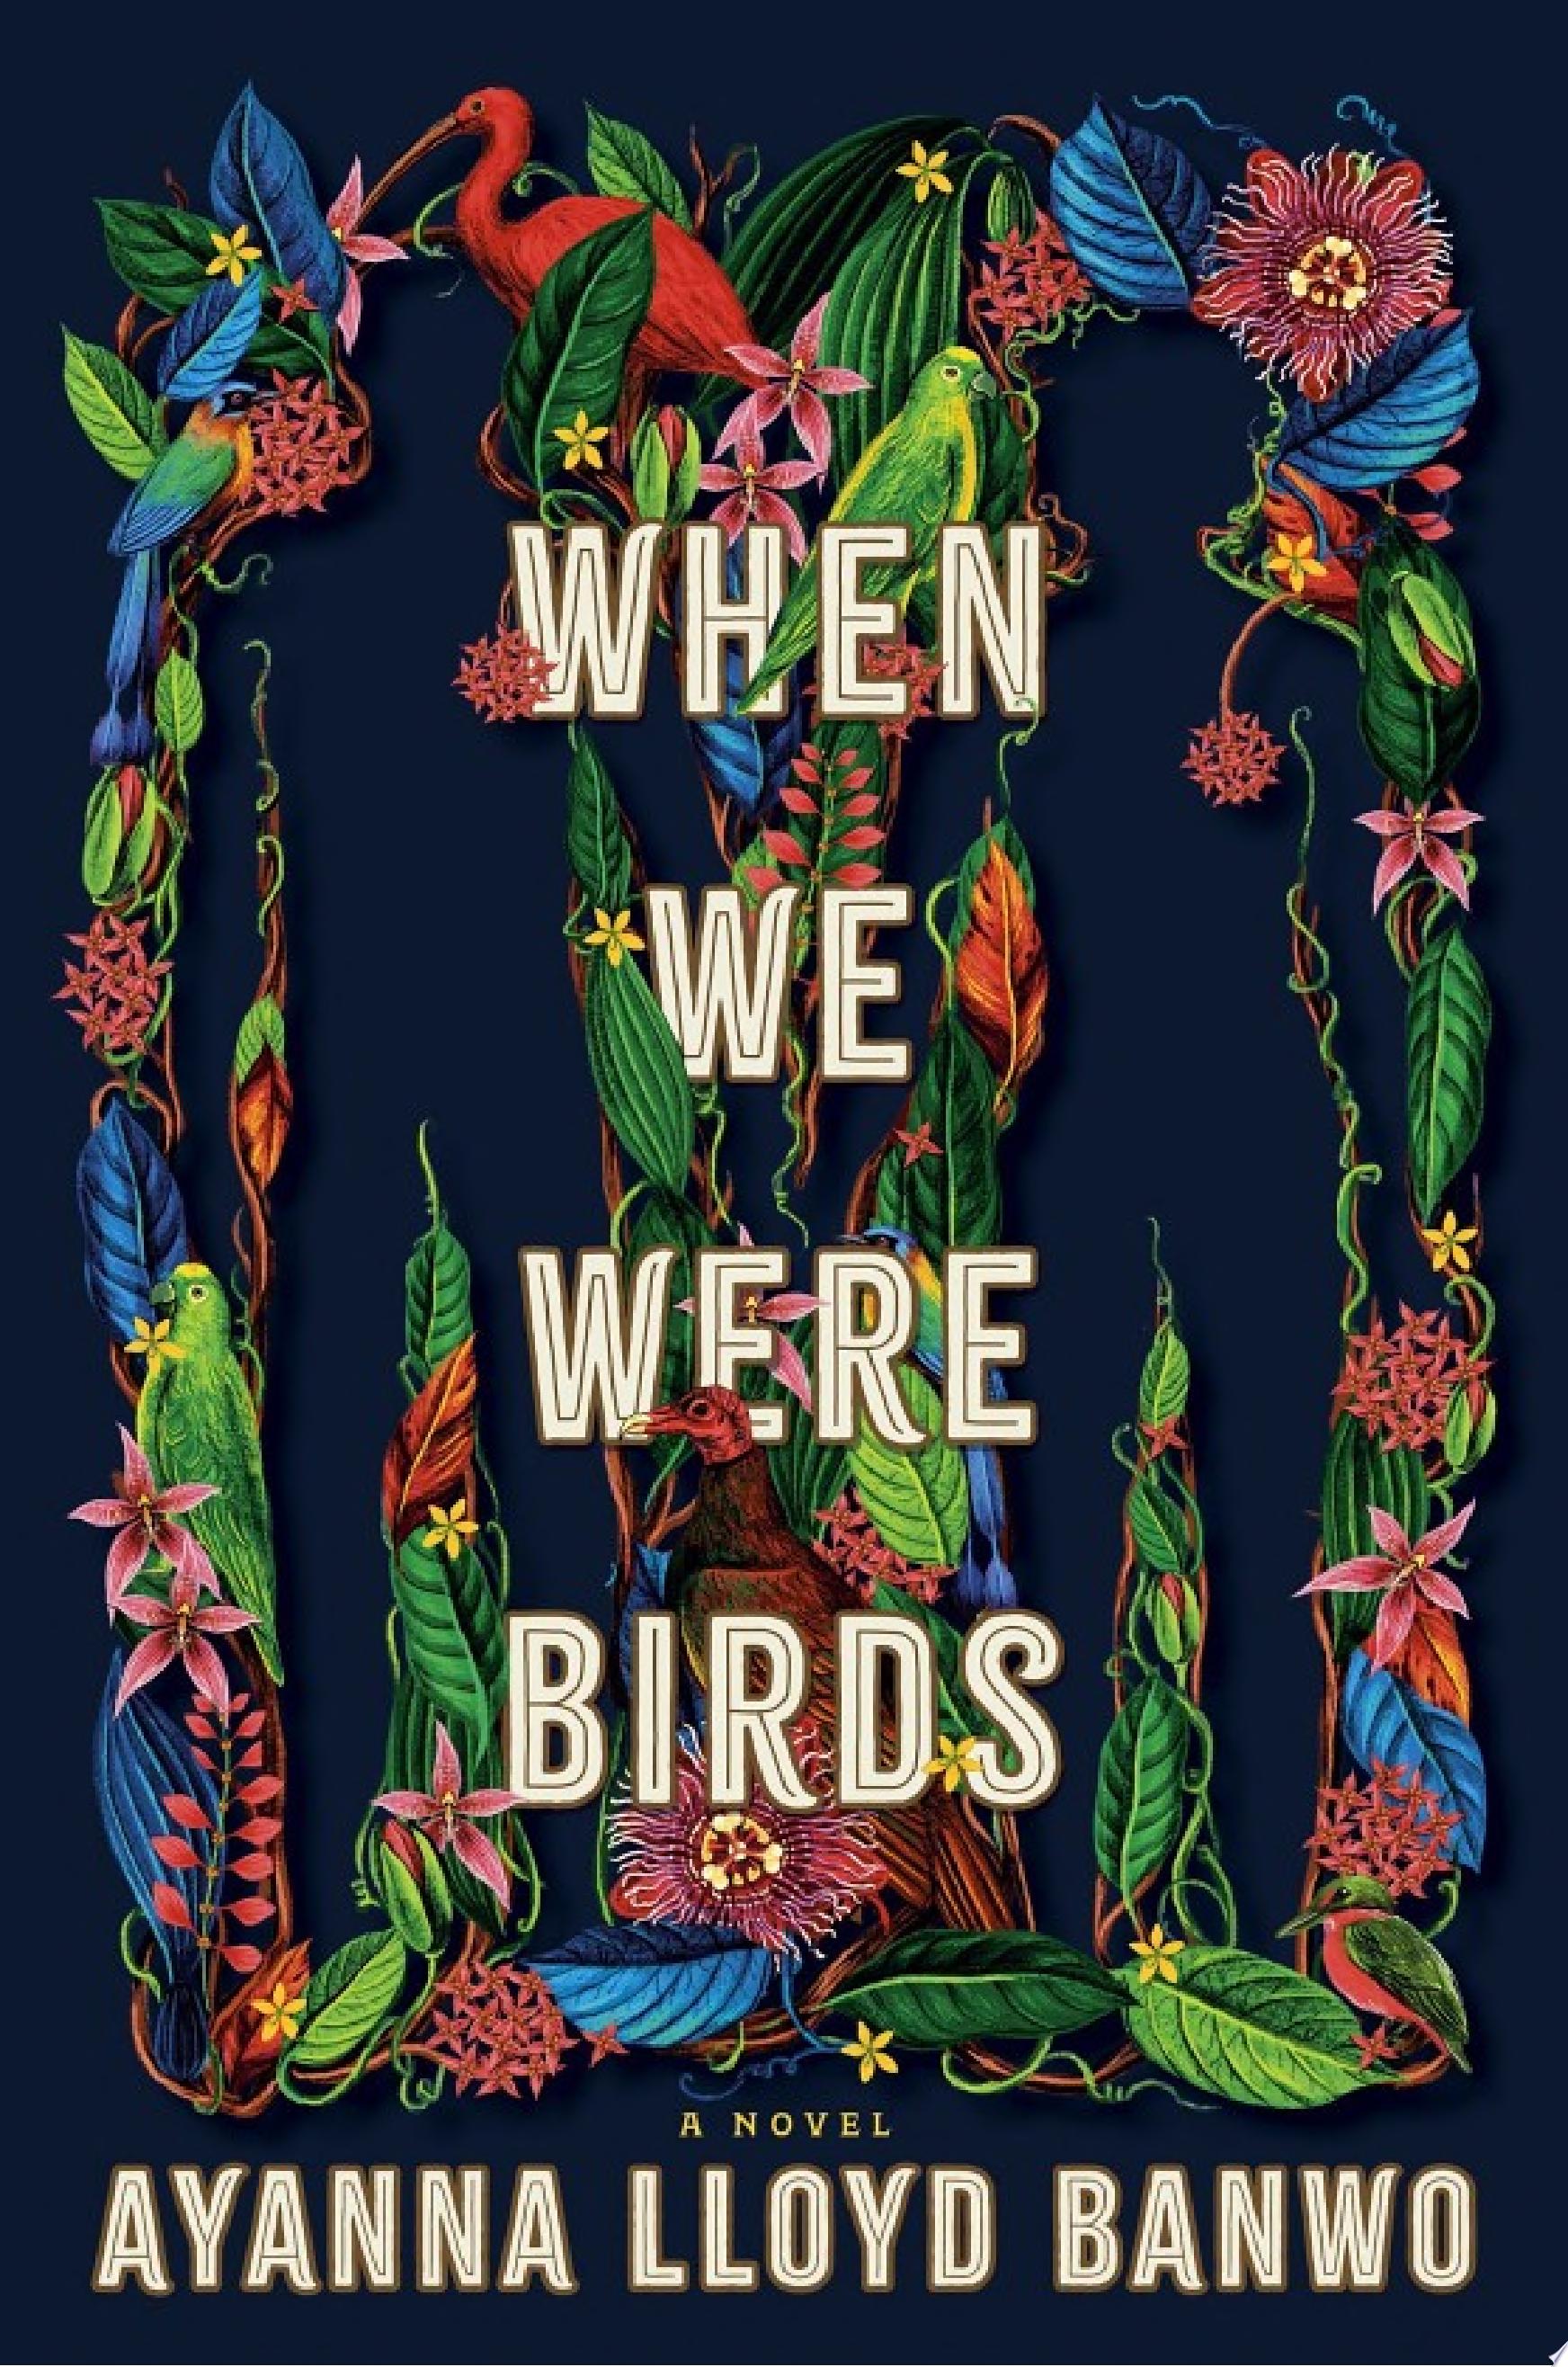 Image for "When We Were Birds"